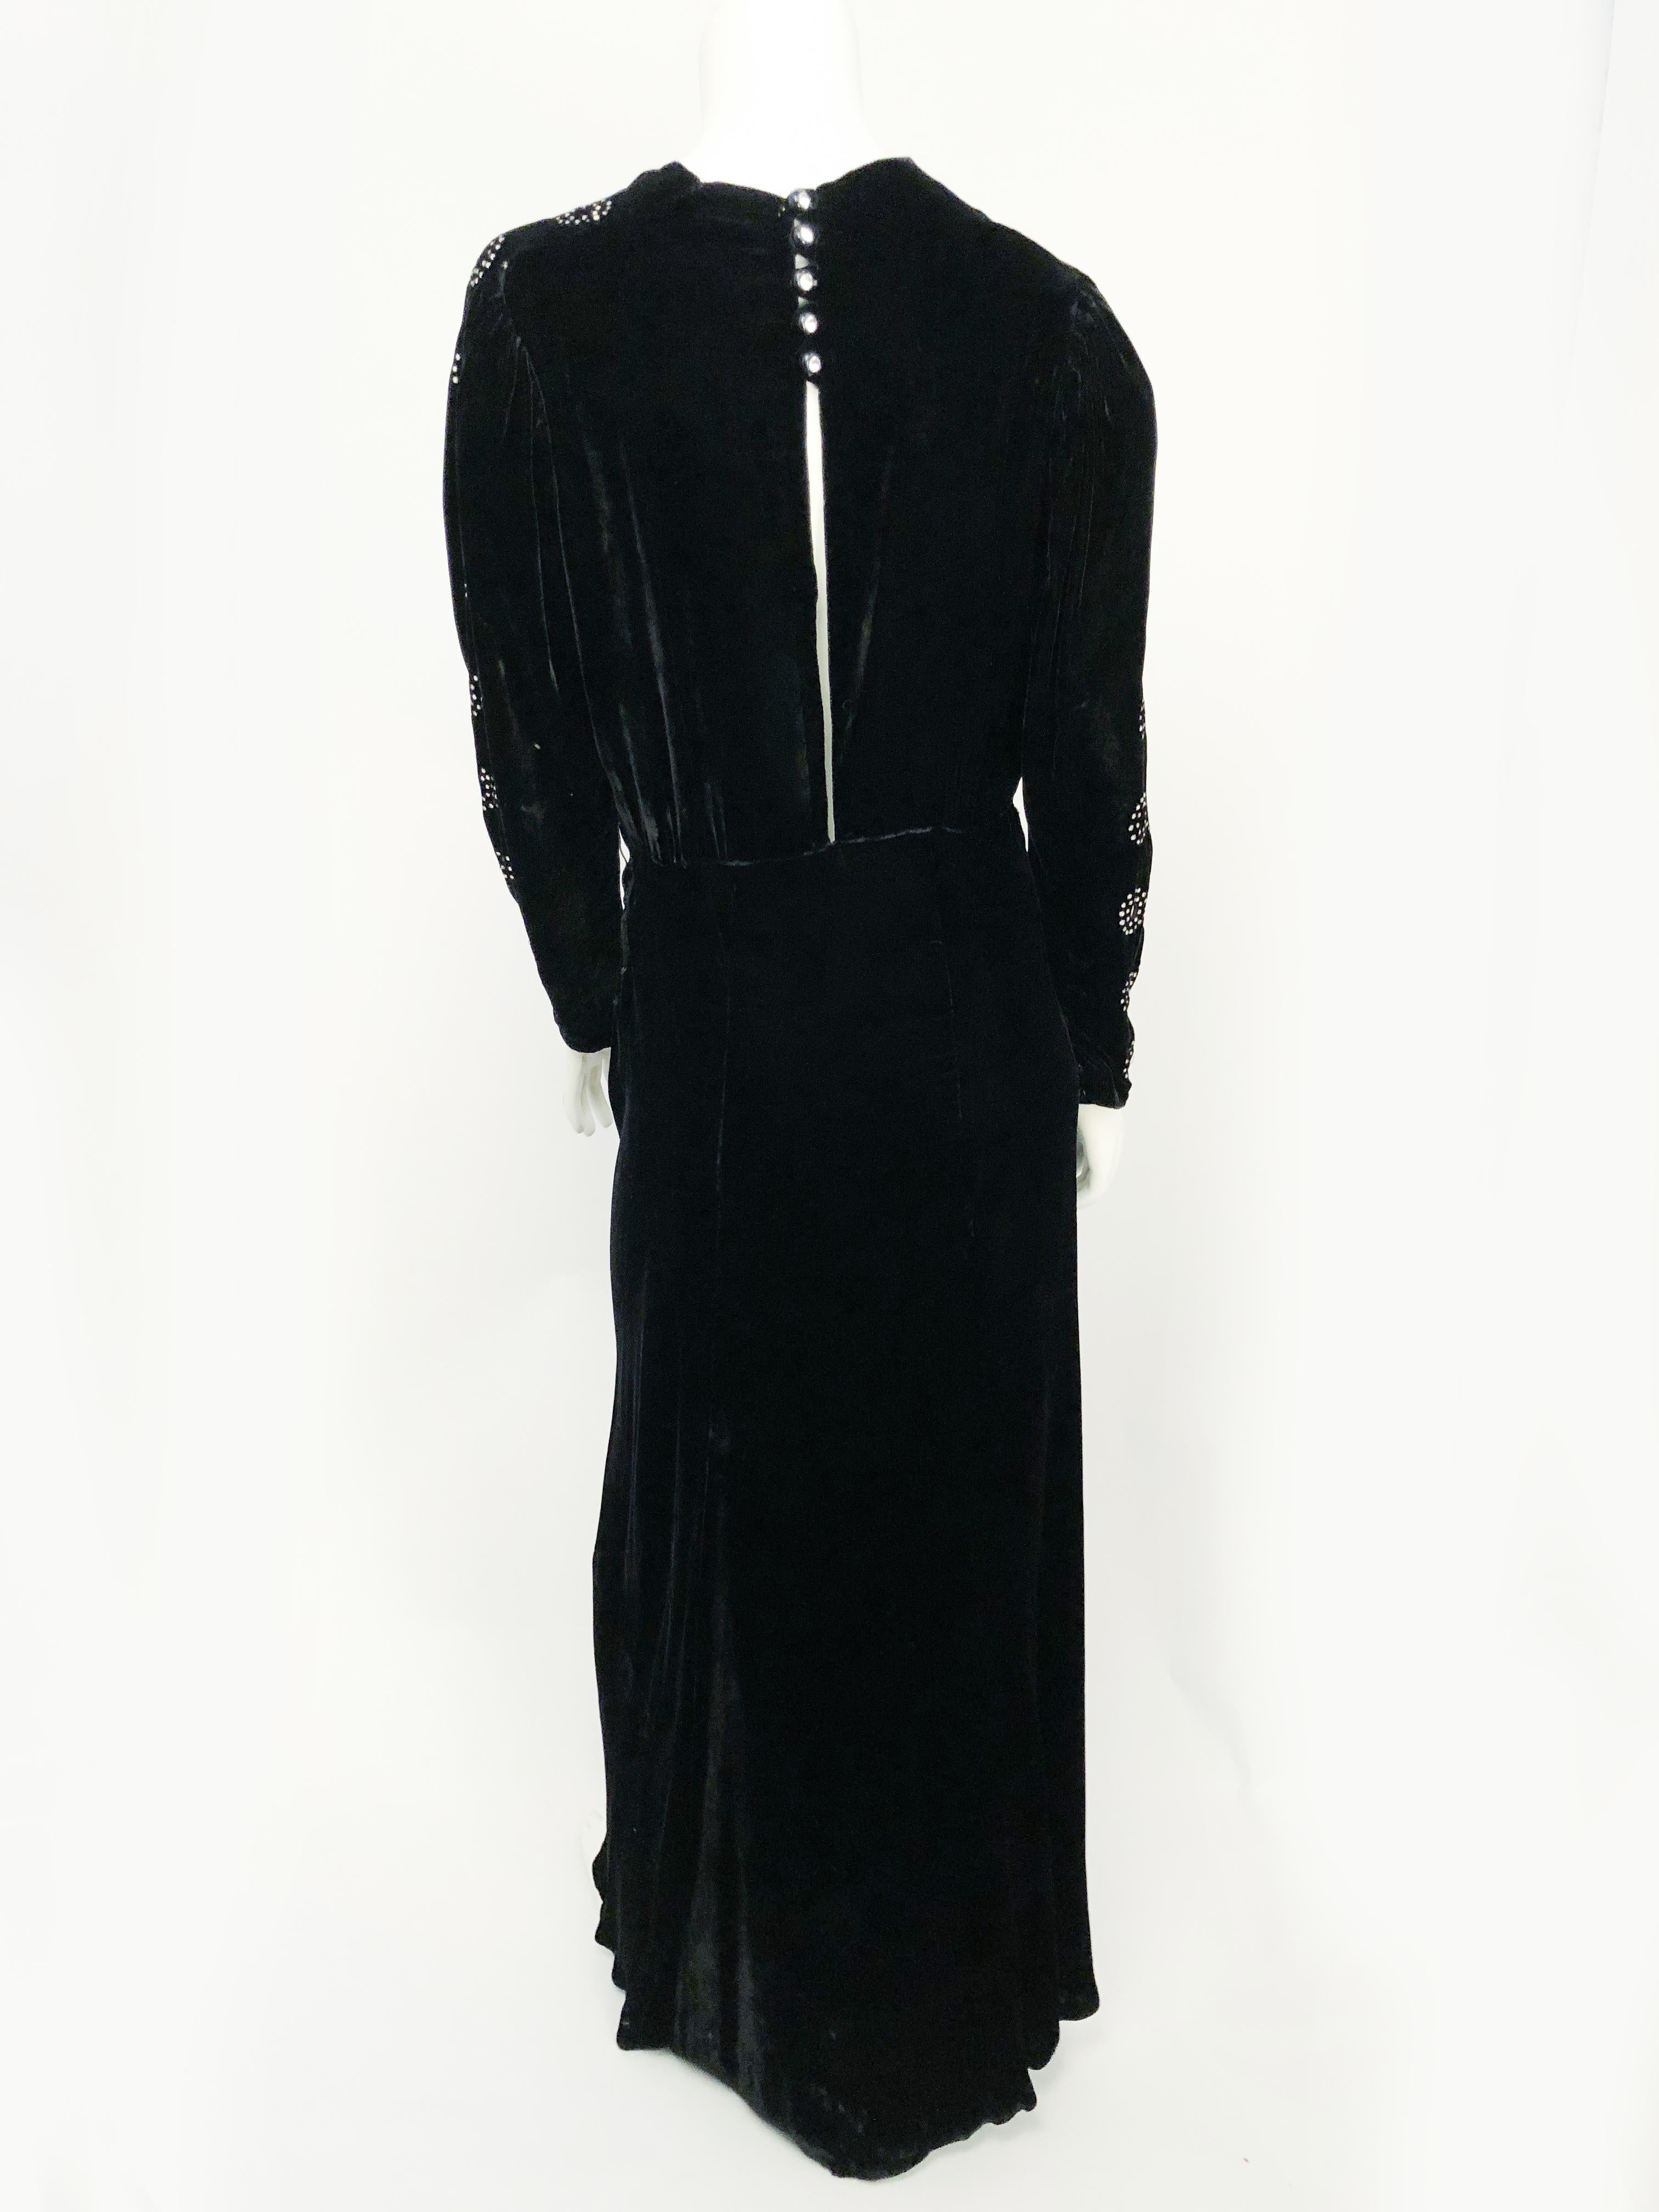 Black Silk Velvet Gown with Rhinestone Accents, 1930s  For Sale 1